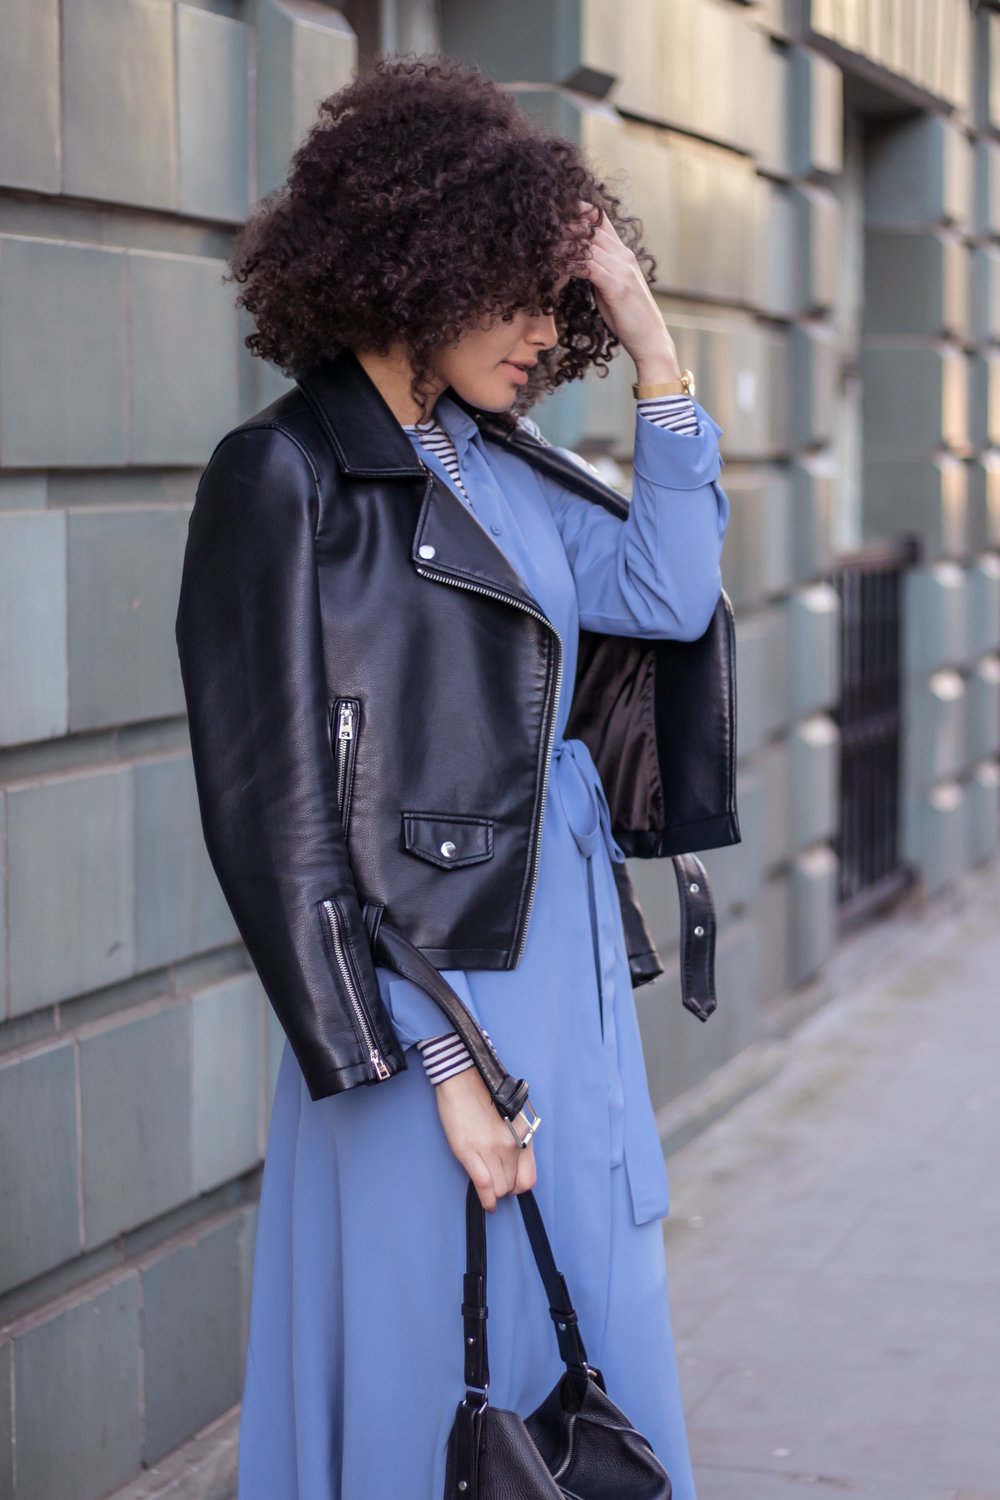 Faux leather biker jacket and dress outfit